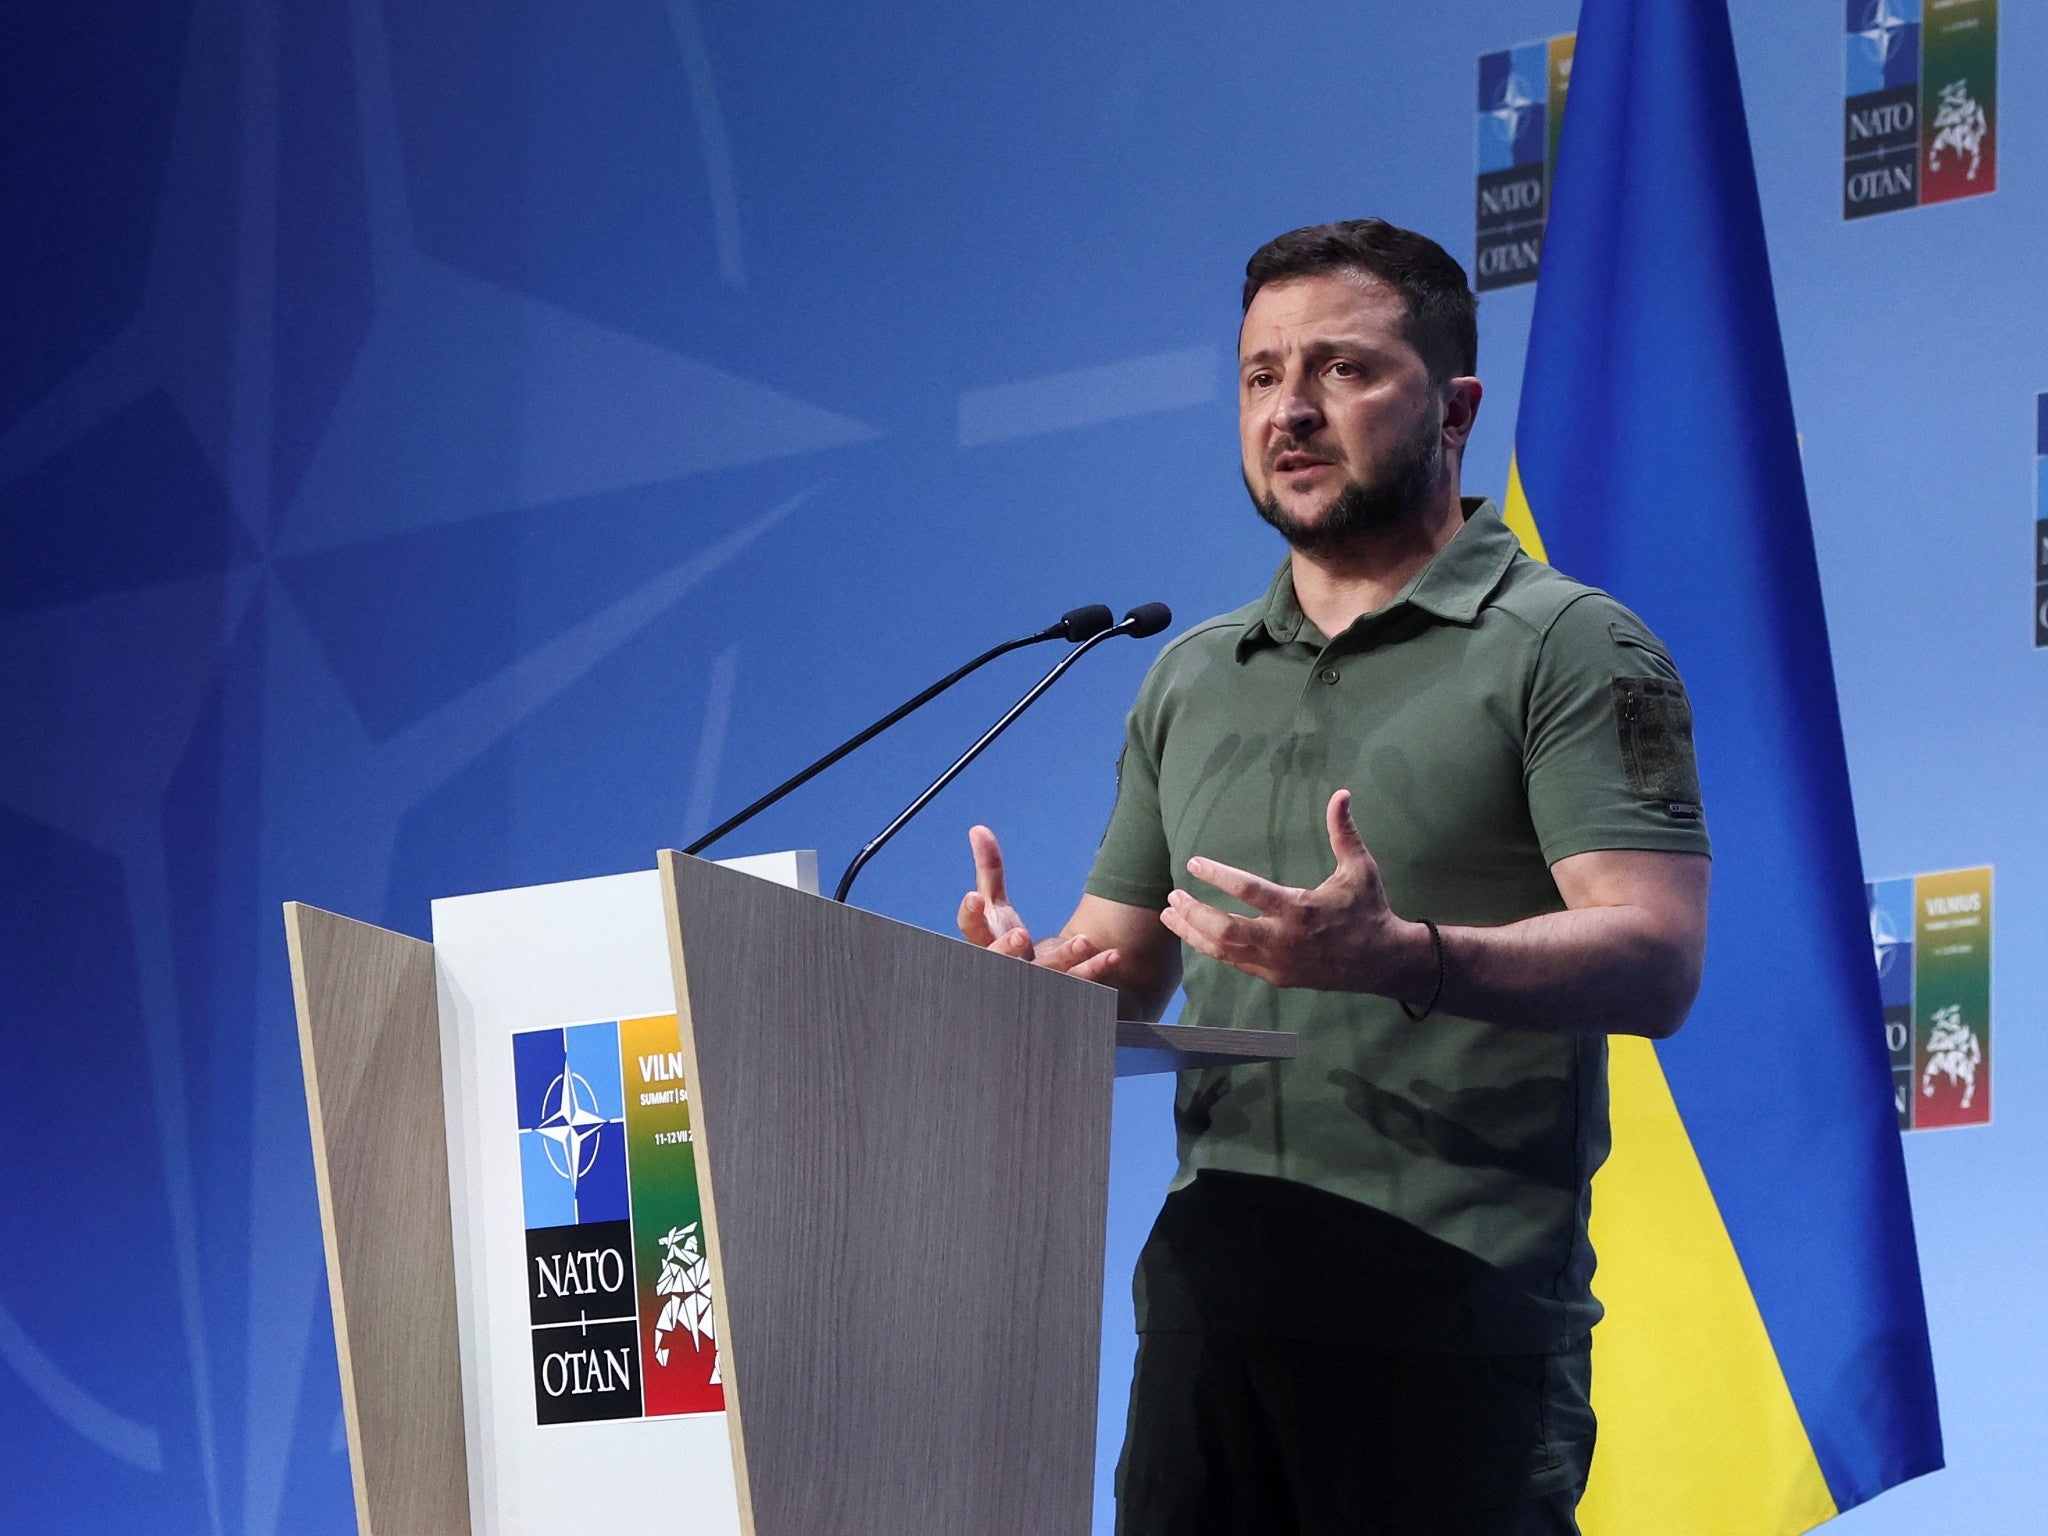 Volodymyr Zelensky fired back at Wallace at press conference